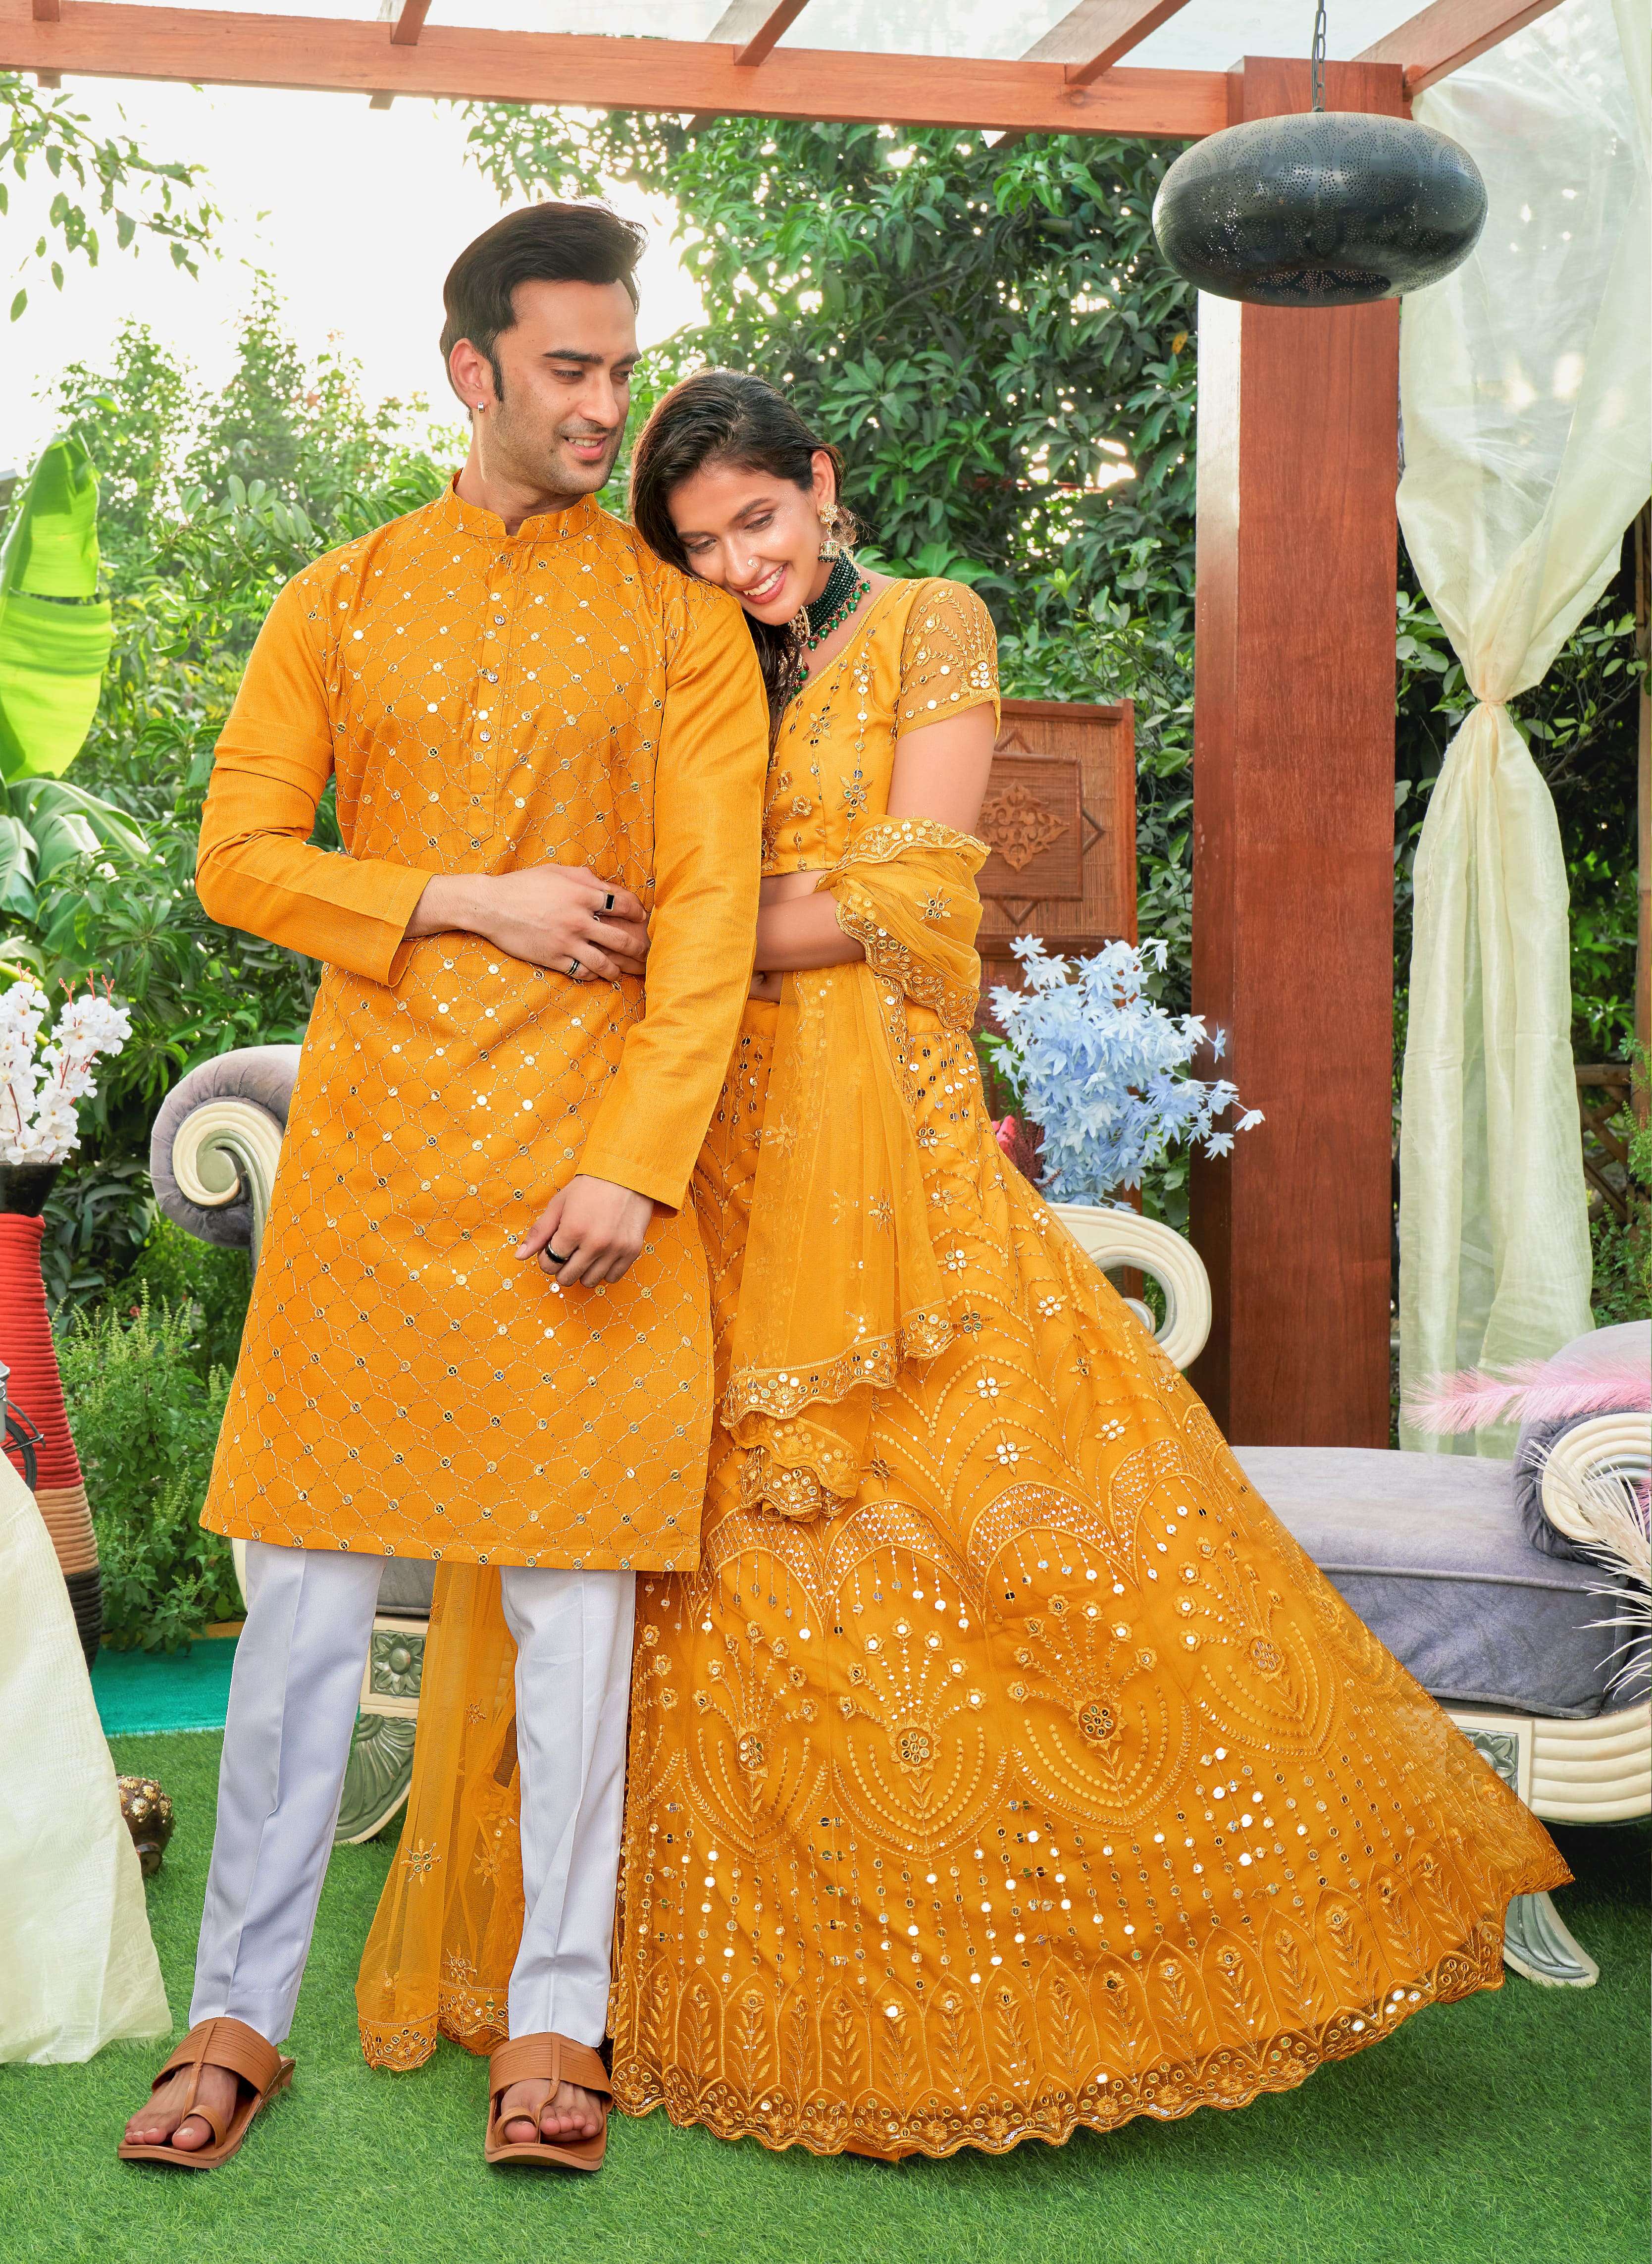 Diwali 2021: Best Celebrity Couple Looks From Bollywood